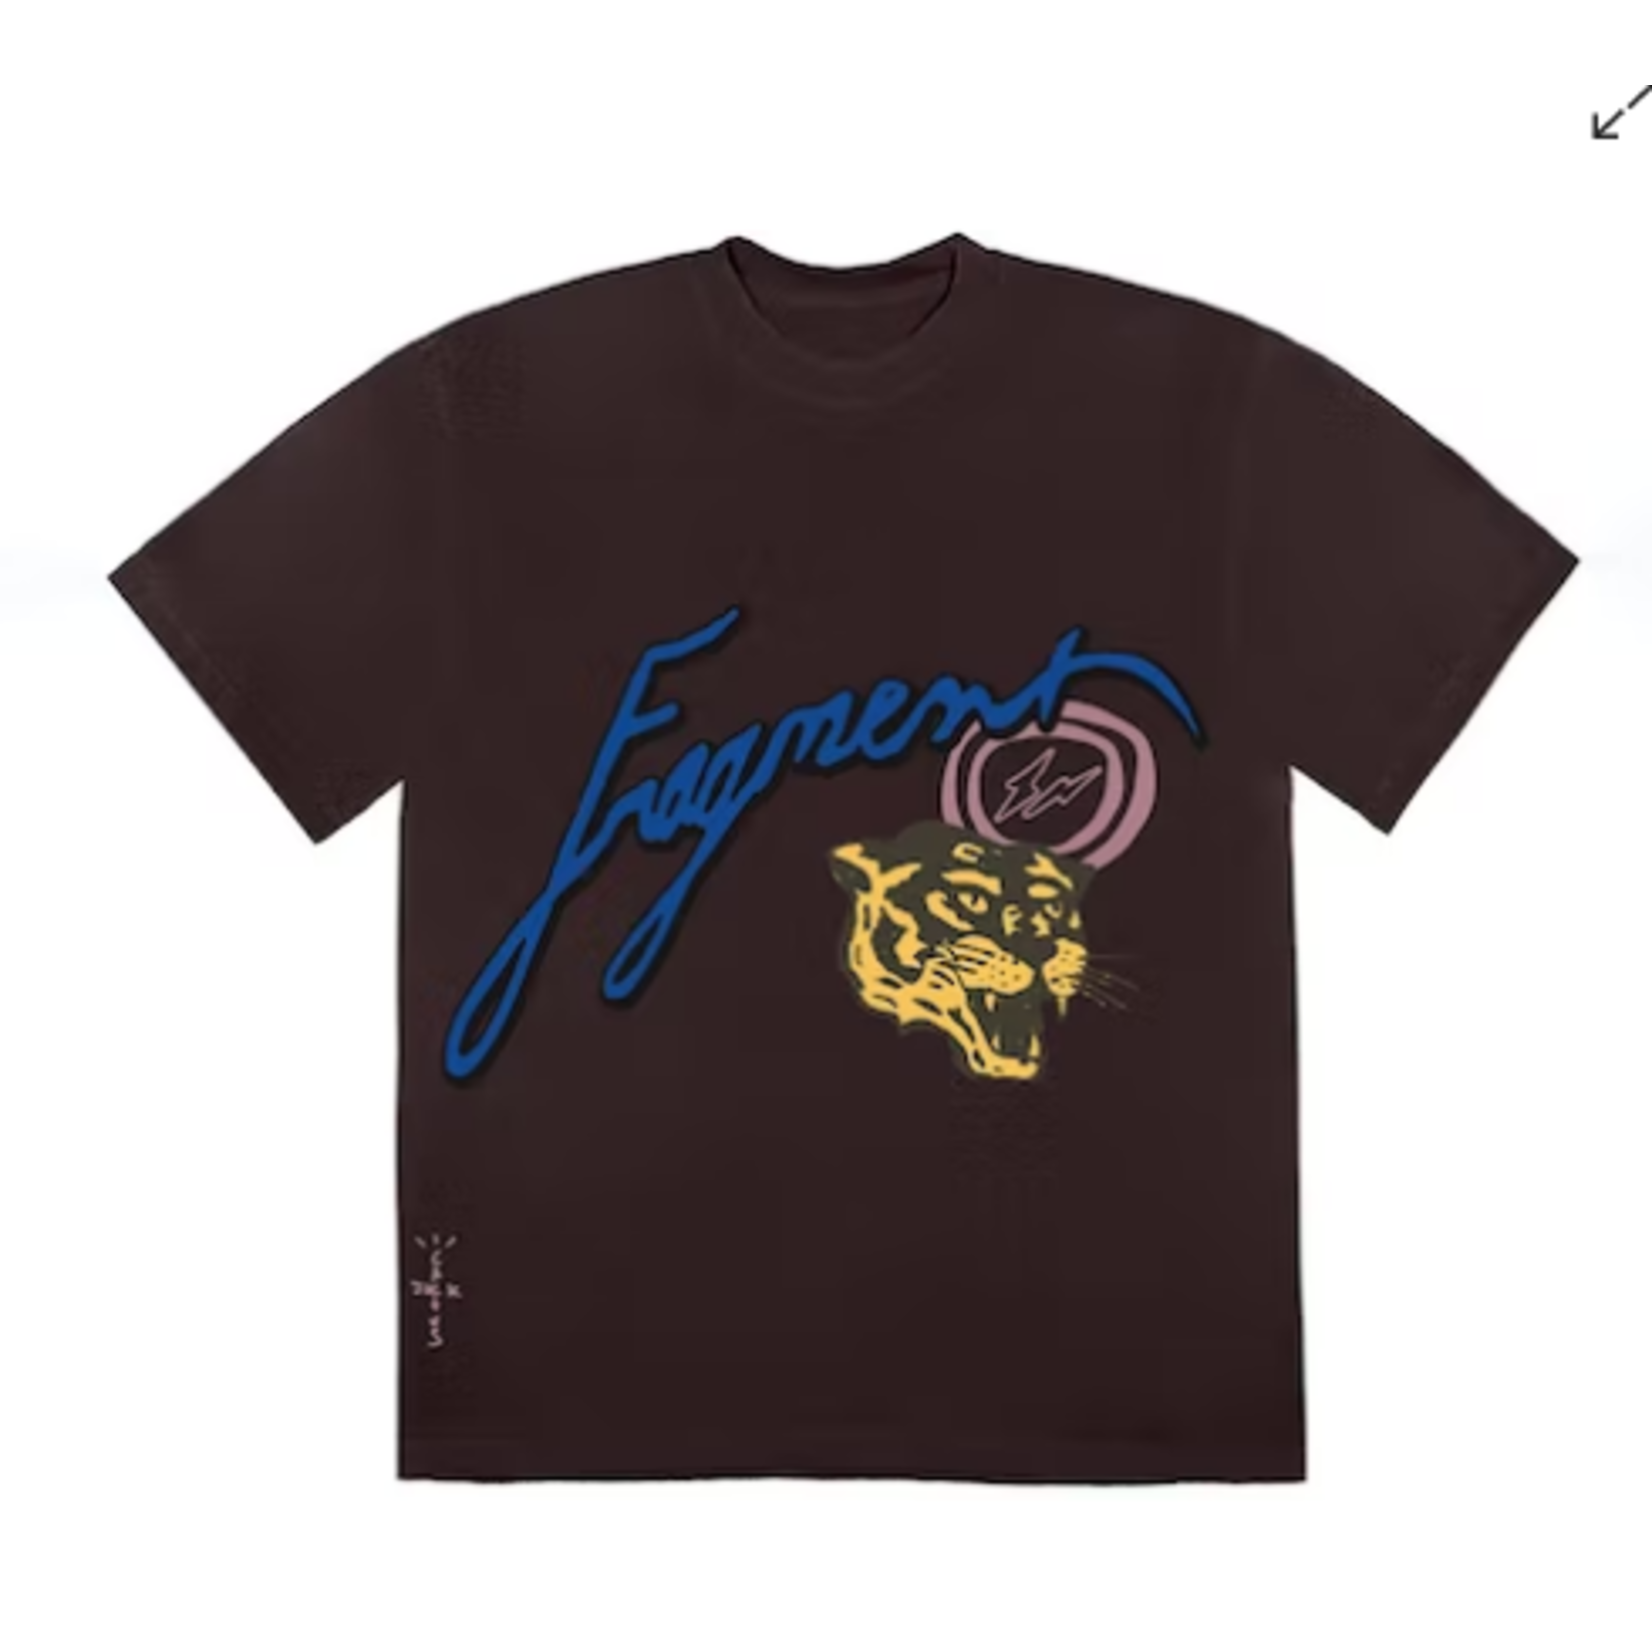 Travis Scott Cactus Jack For Fragment Icons Tee Brown Size Small, DS BRAND NEW